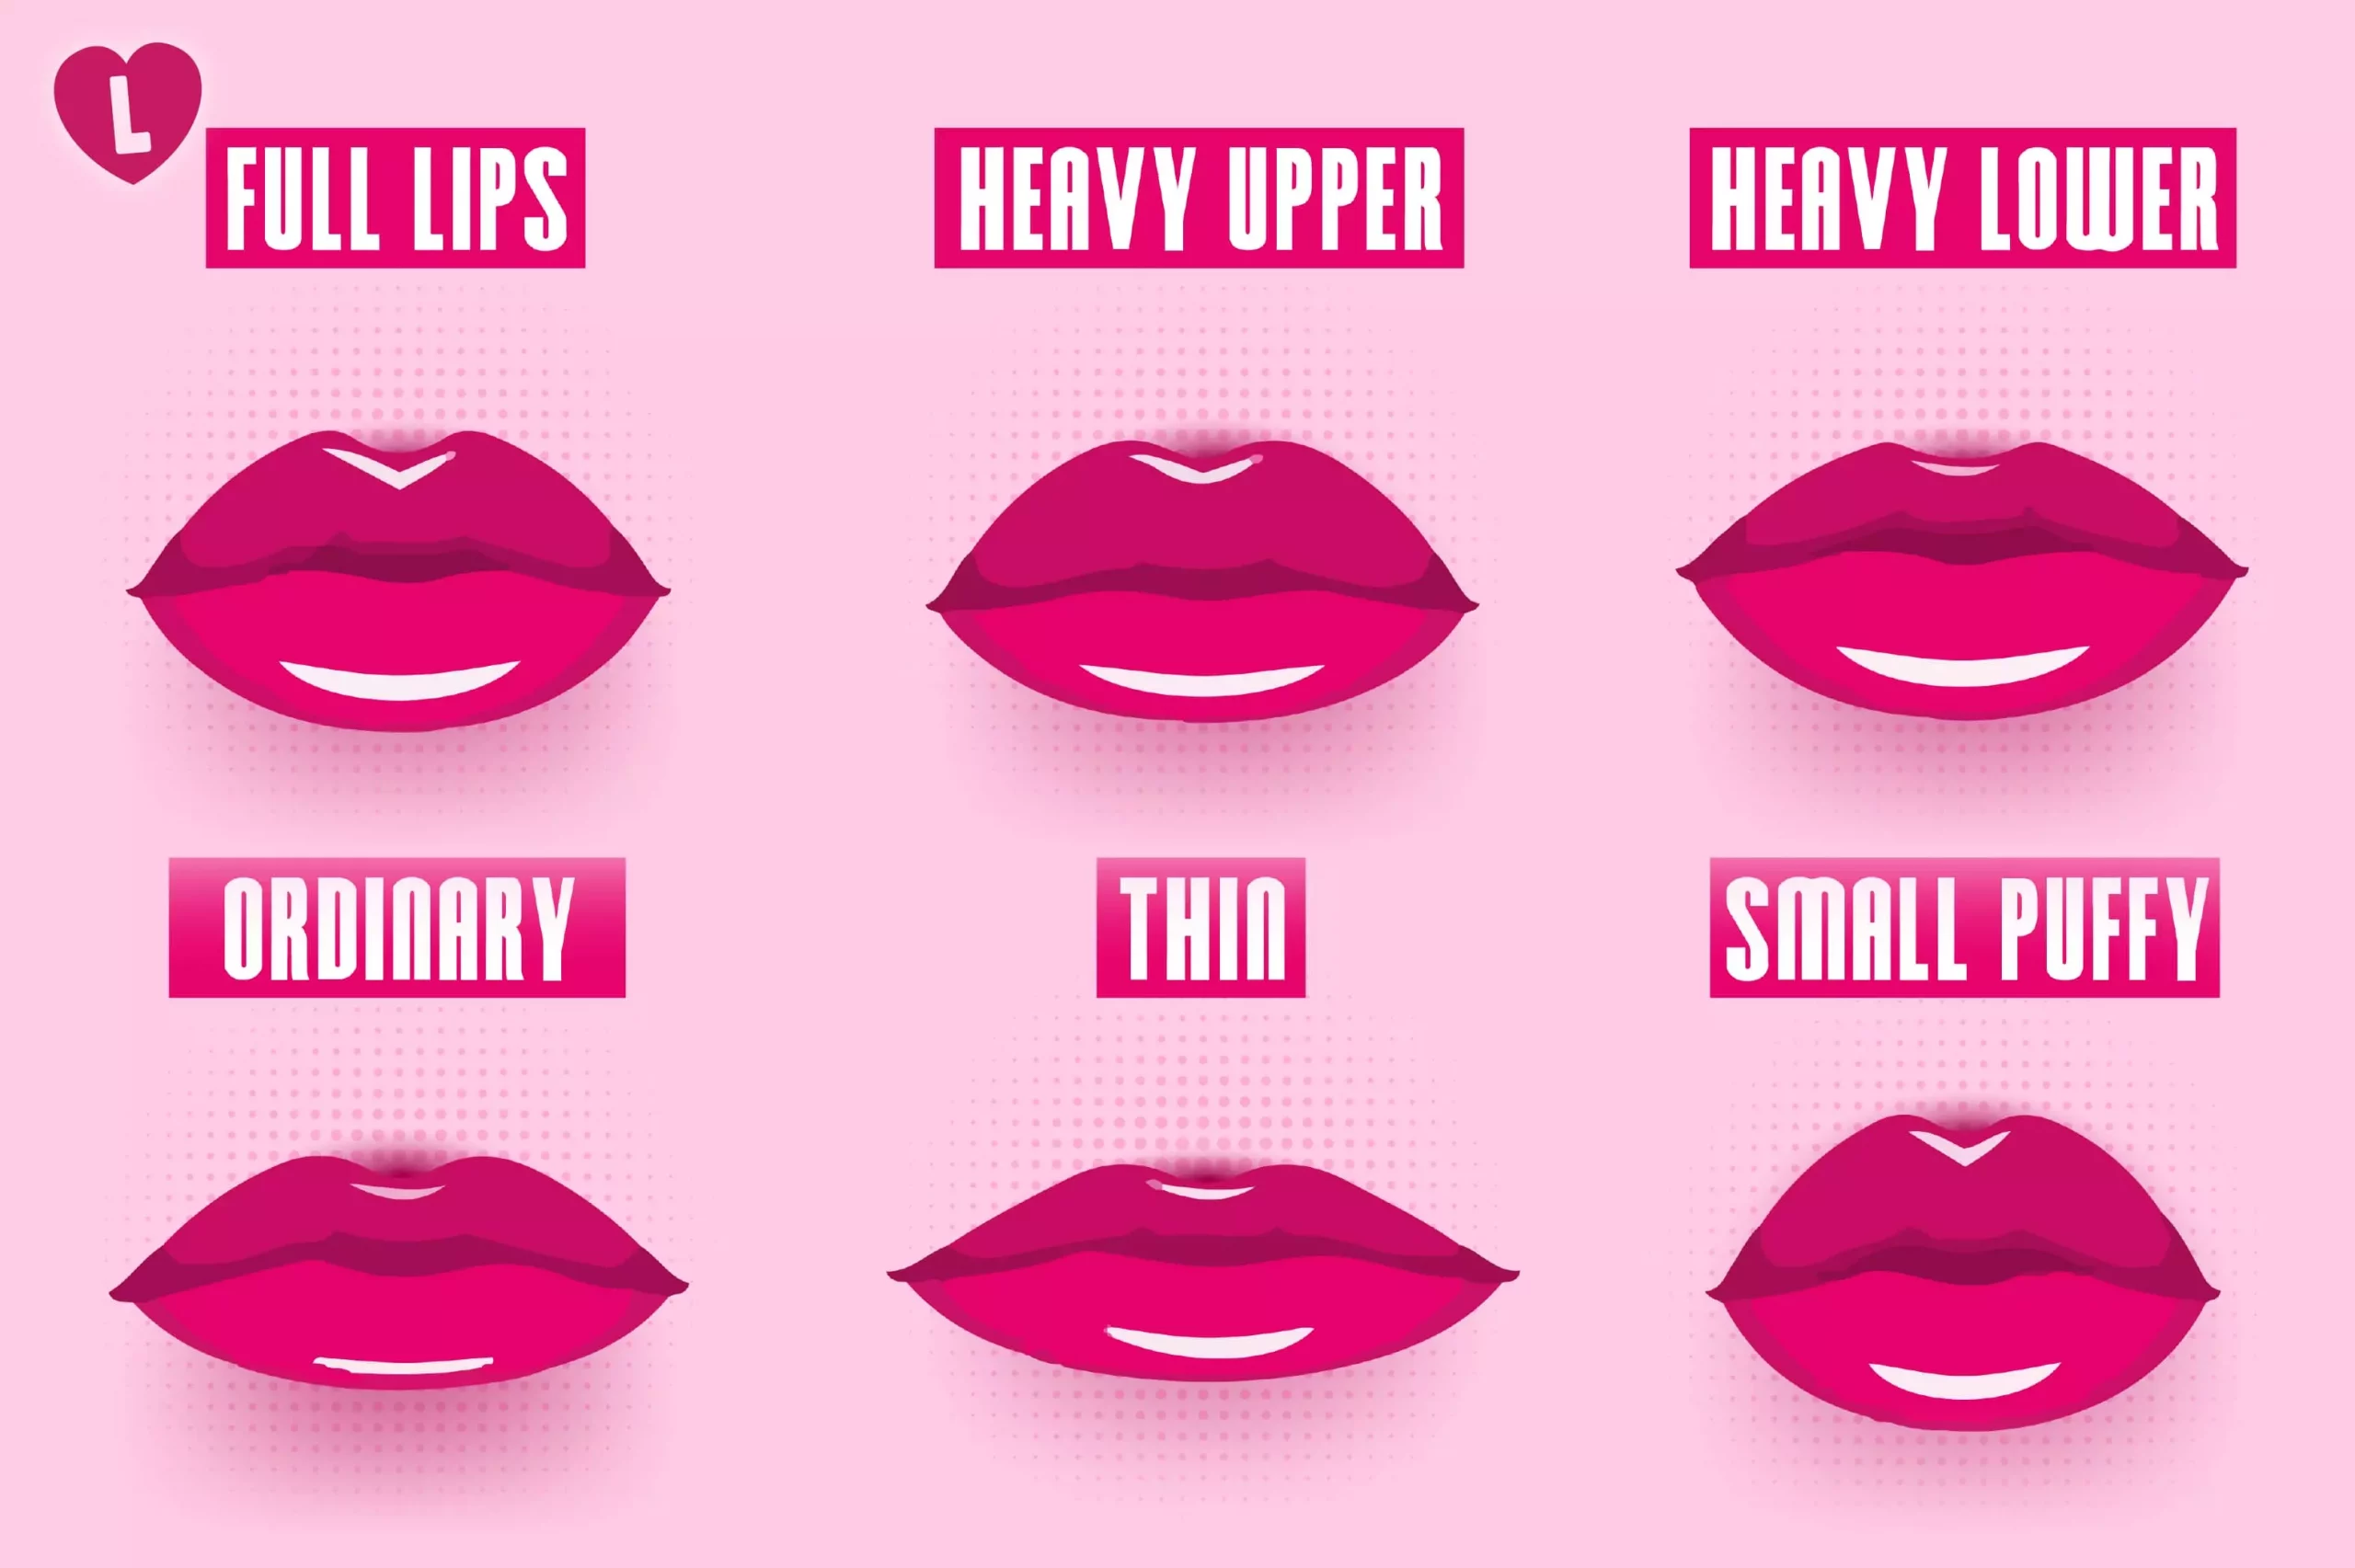 Did you know that the shape of your lips reveals your personality?